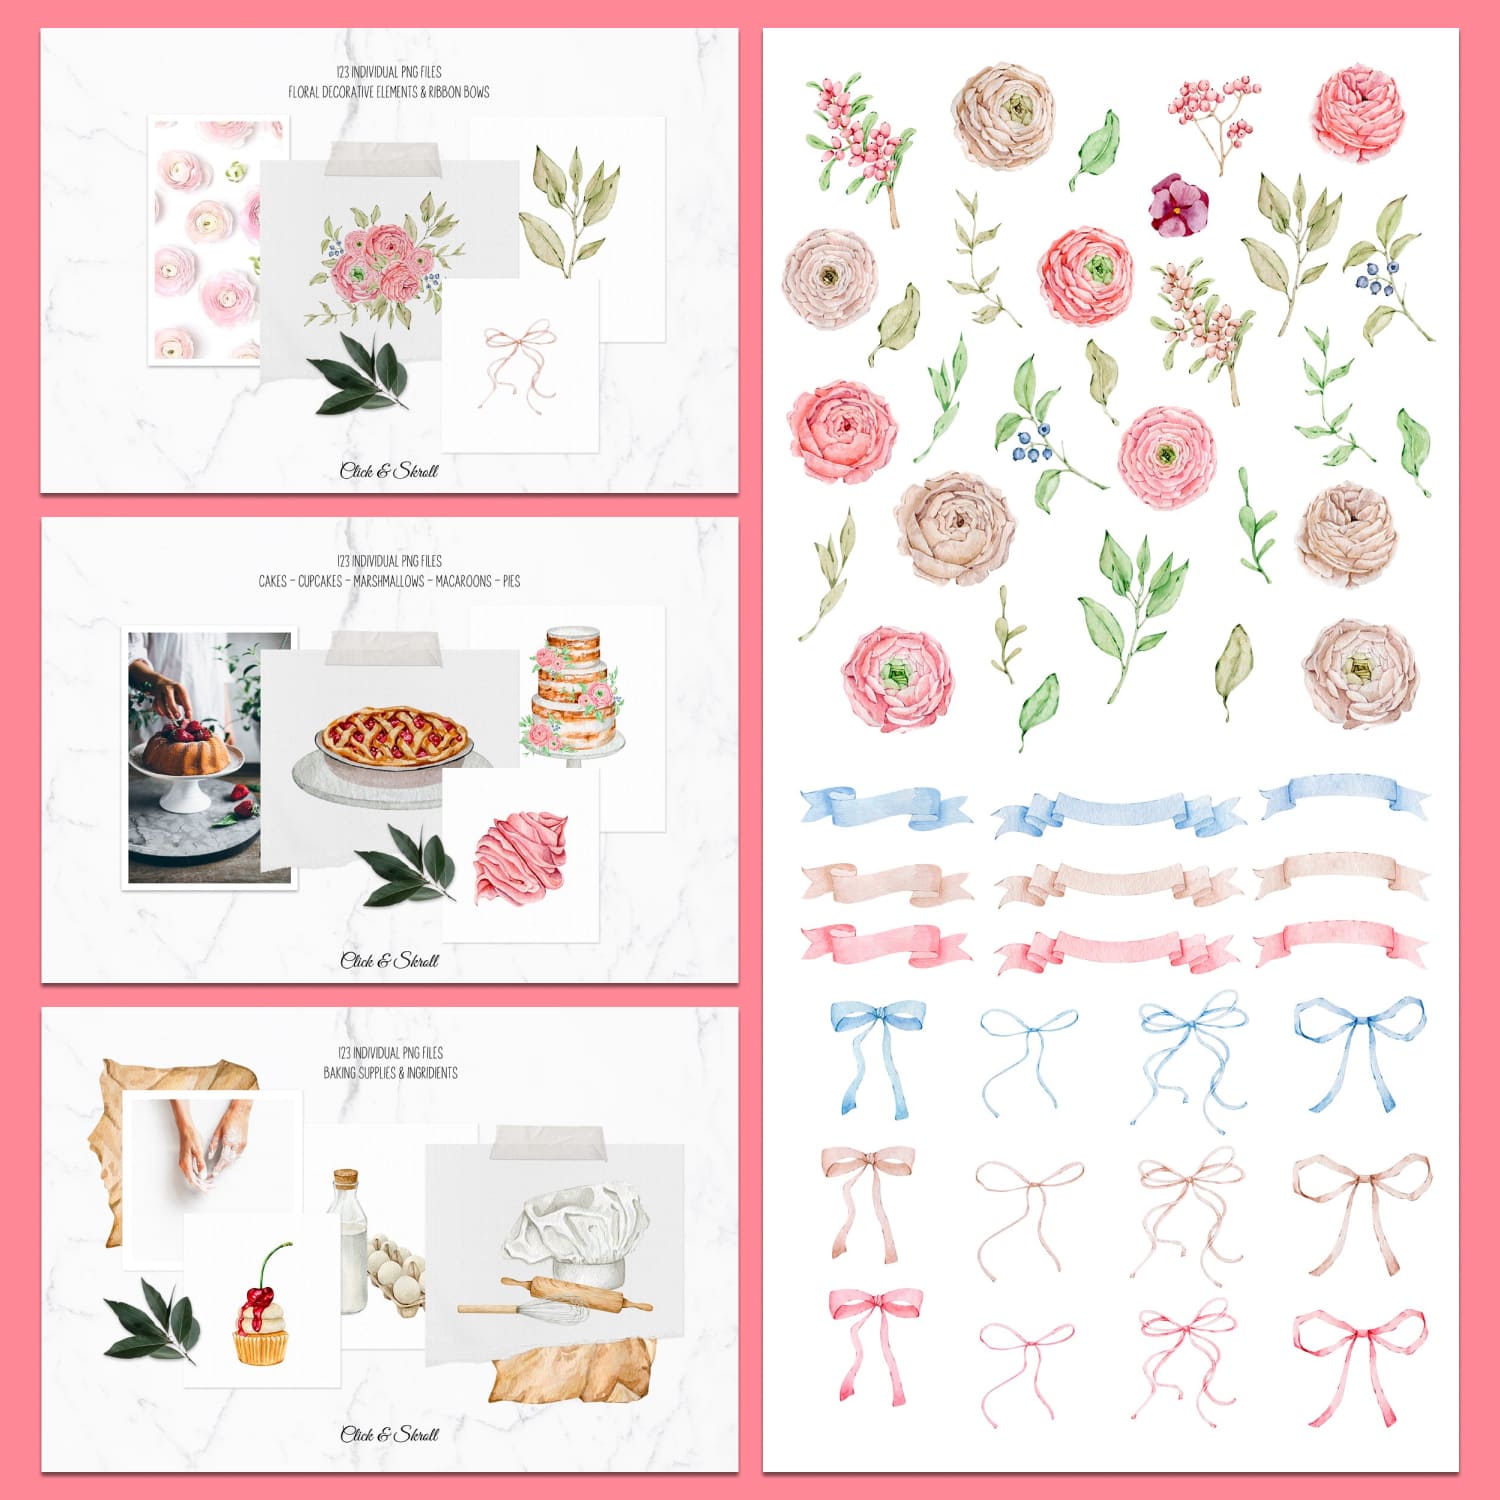 Pastry cook bakery watercolor set created by AlinaOsadchenko.